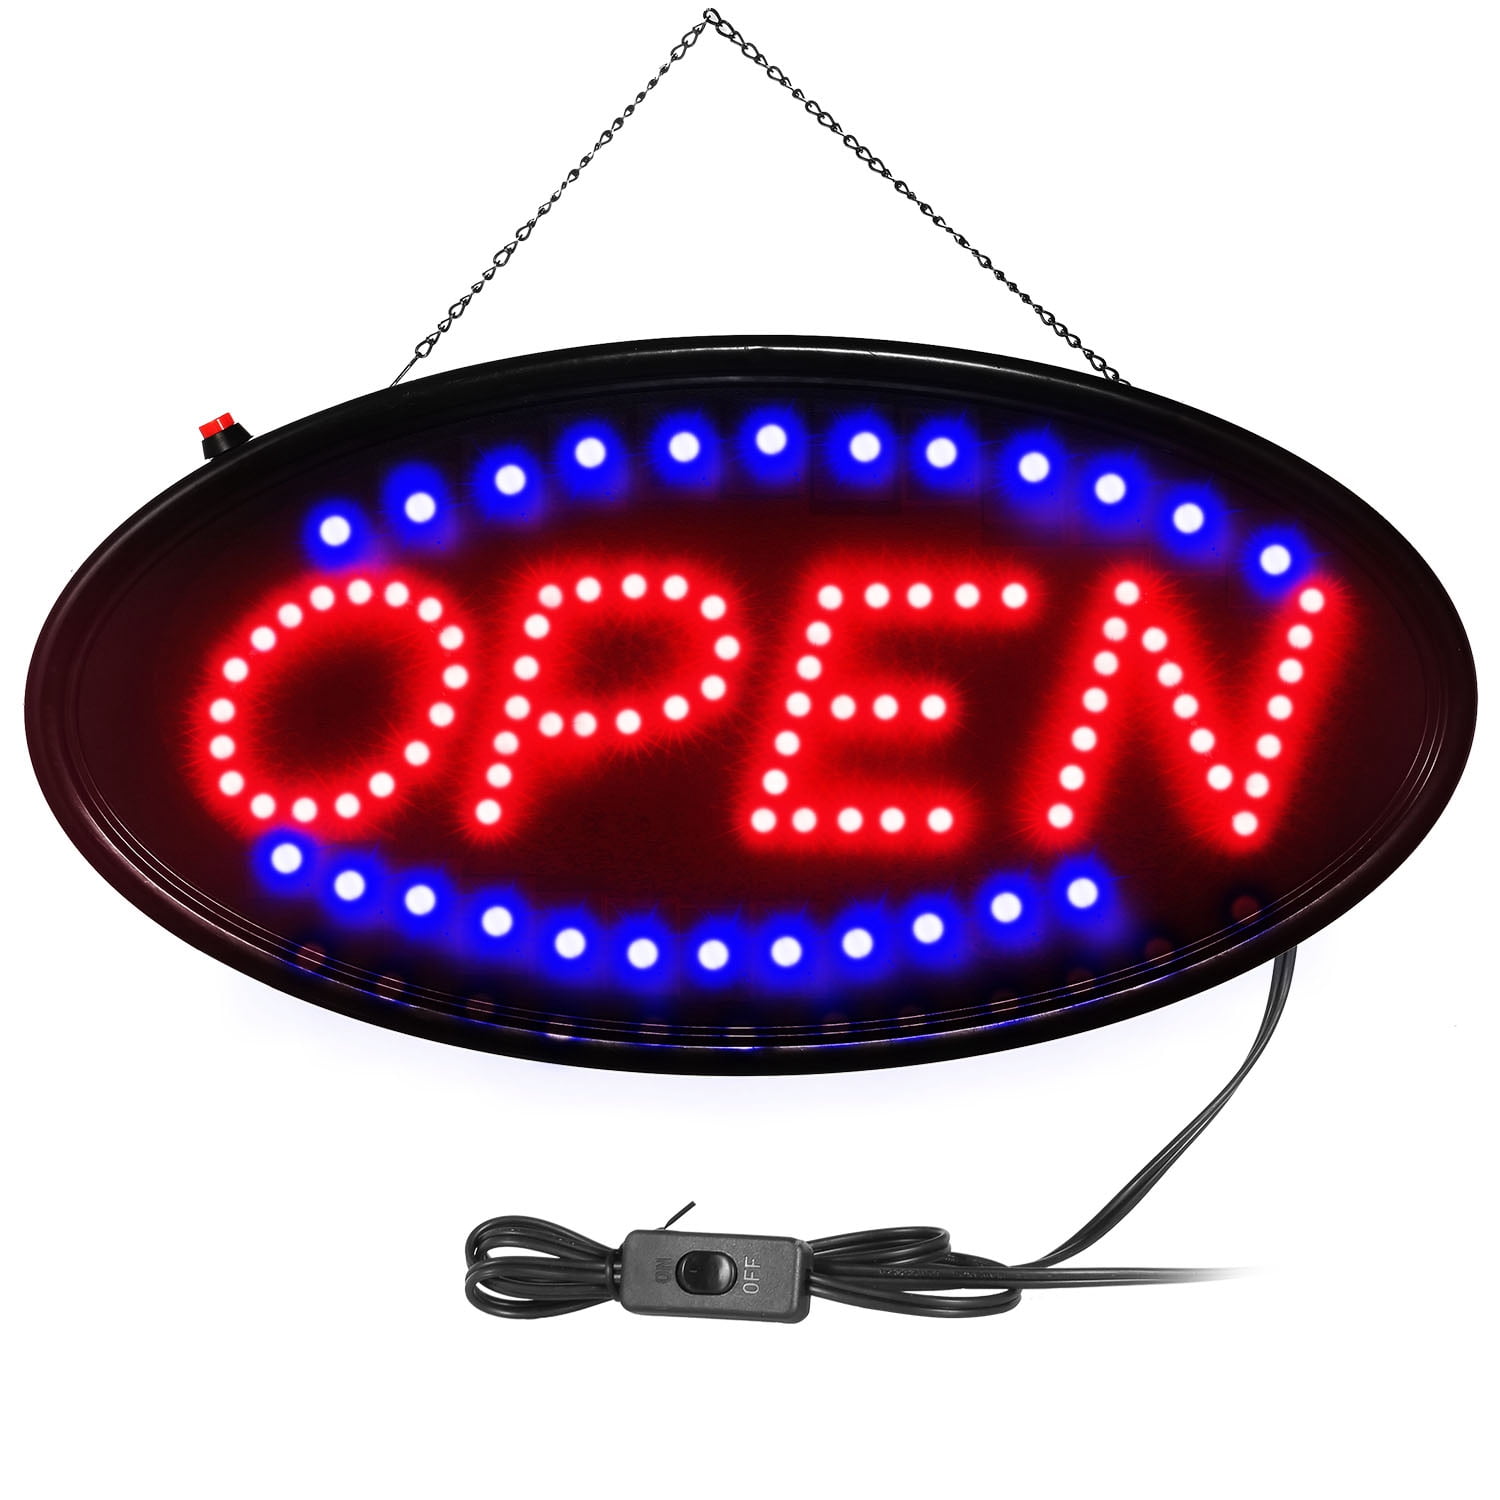 Led Sign BAR Bright Animated Flashing Commercial Retail Shop Signs Led's 